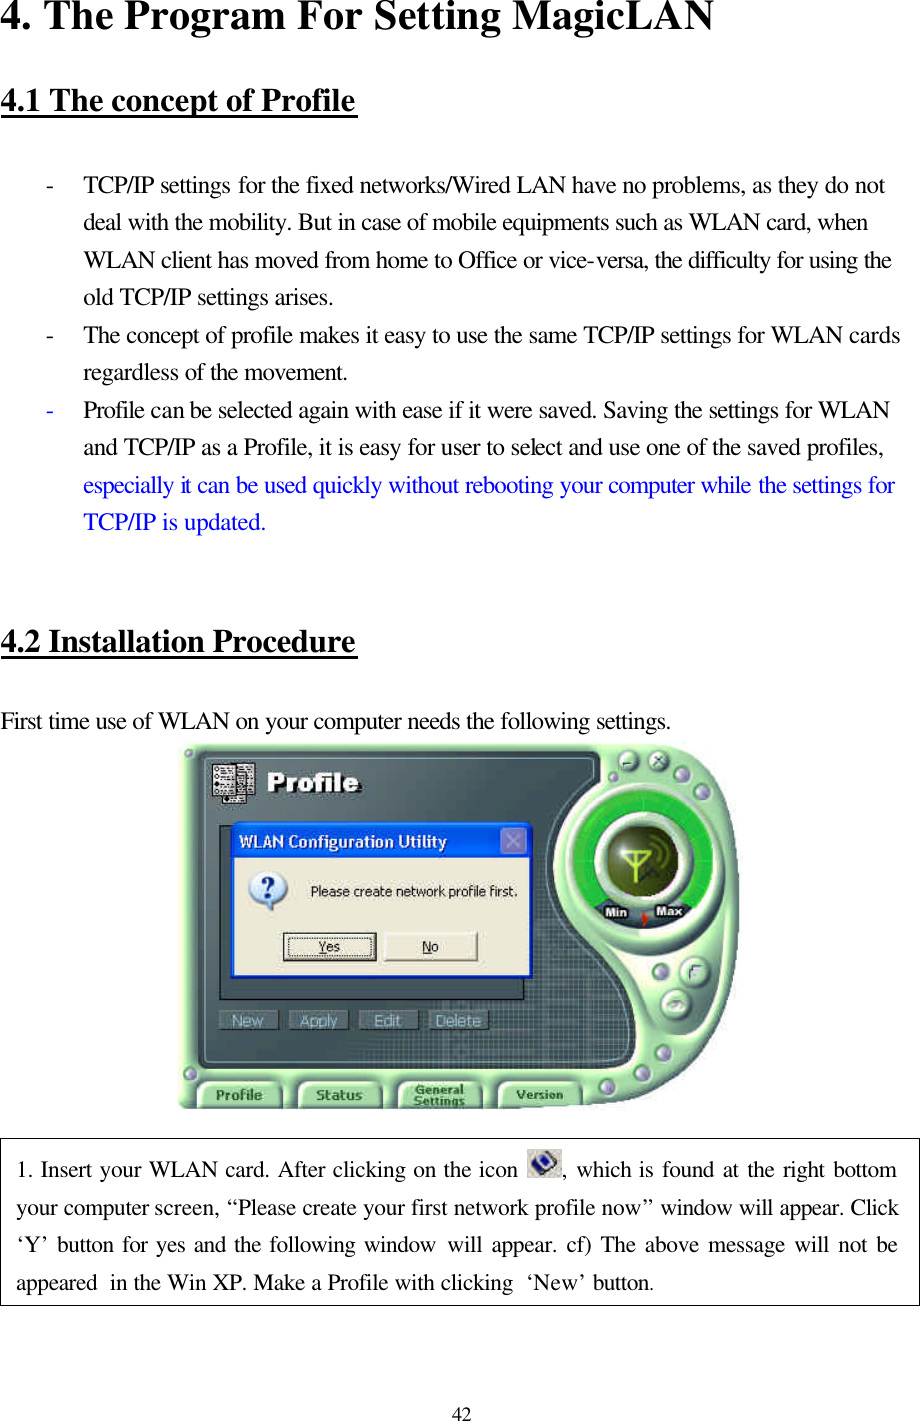  42  4. The Program For Setting MagicLAN   4.1 The concept of Profile   - TCP/IP settings for the fixed networks/Wired LAN have no problems, as they do not deal with the mobility. But in case of mobile equipments such as WLAN card, when WLAN client has moved from home to Office or vice-versa, the difficulty for using the old TCP/IP settings arises. - The concept of profile makes it easy to use the same TCP/IP settings for WLAN cards regardless of the movement. - Profile can be selected again with ease if it were saved. Saving the settings for WLAN and TCP/IP as a Profile, it is easy for user to select and use one of the saved profiles, especially it can be used quickly without rebooting your computer while the settings for TCP/IP is updated.      4.2 Installation Procedure   First time use of WLAN on your computer needs the following settings.   1. Insert your WLAN card. After clicking on the icon  , which is found at the right bottom your computer screen, “Please create your first network profile now” window will appear. Click ‘Y’ button for yes and the following window will appear. cf) The above message will not be appeared  in the Win XP. Make a Profile with clicking  ‘New’ button. 